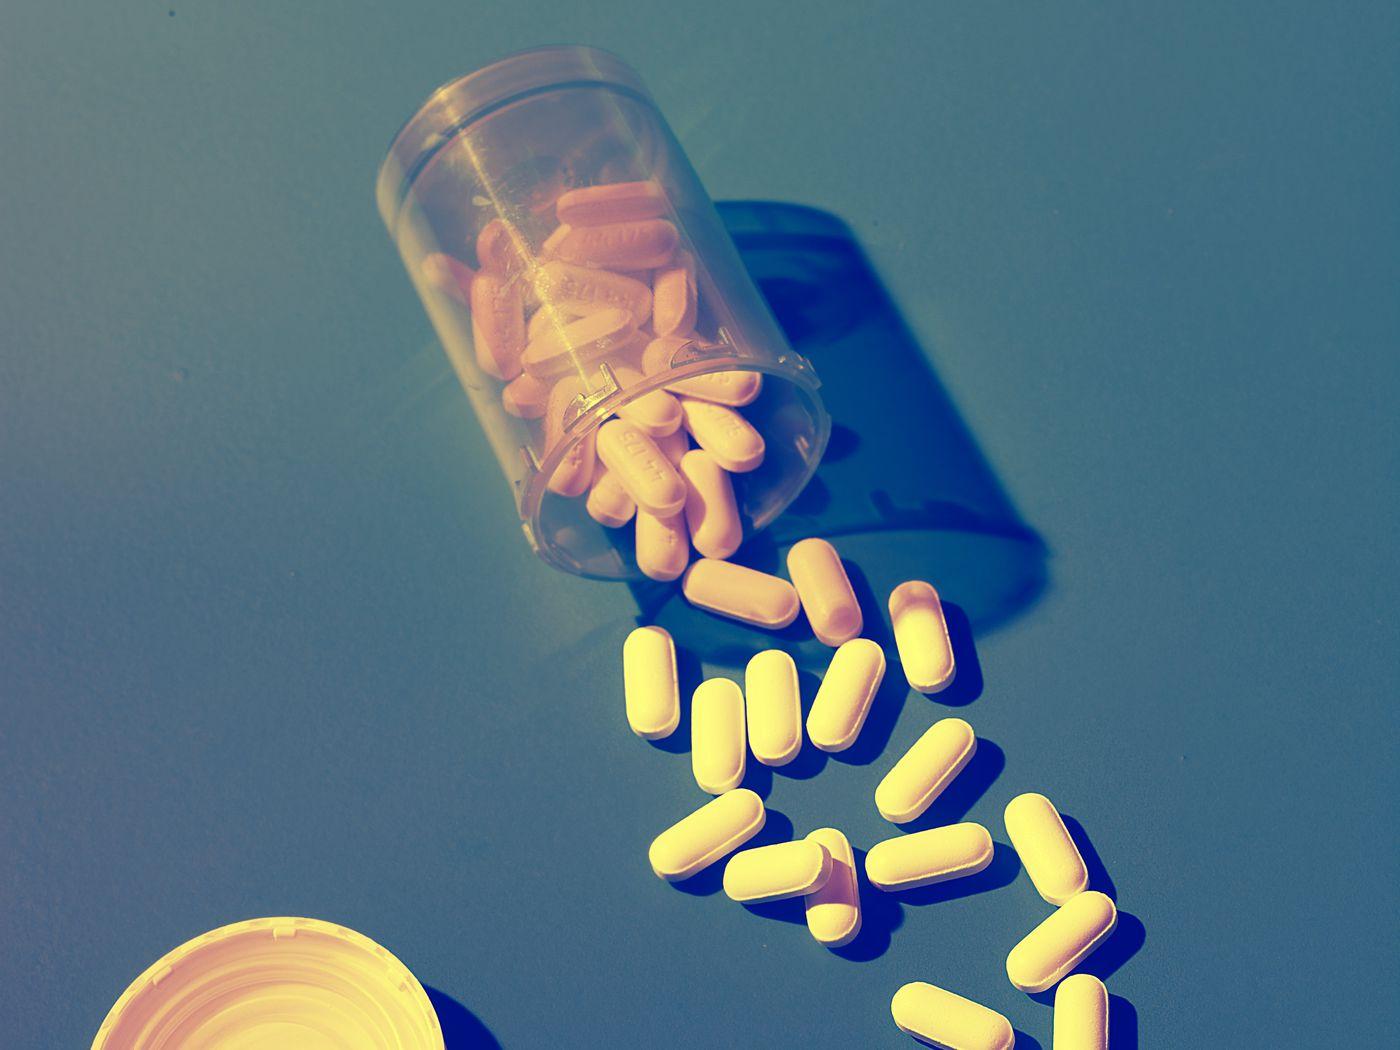 The placebo effect has an evil twin that makes you feel pain